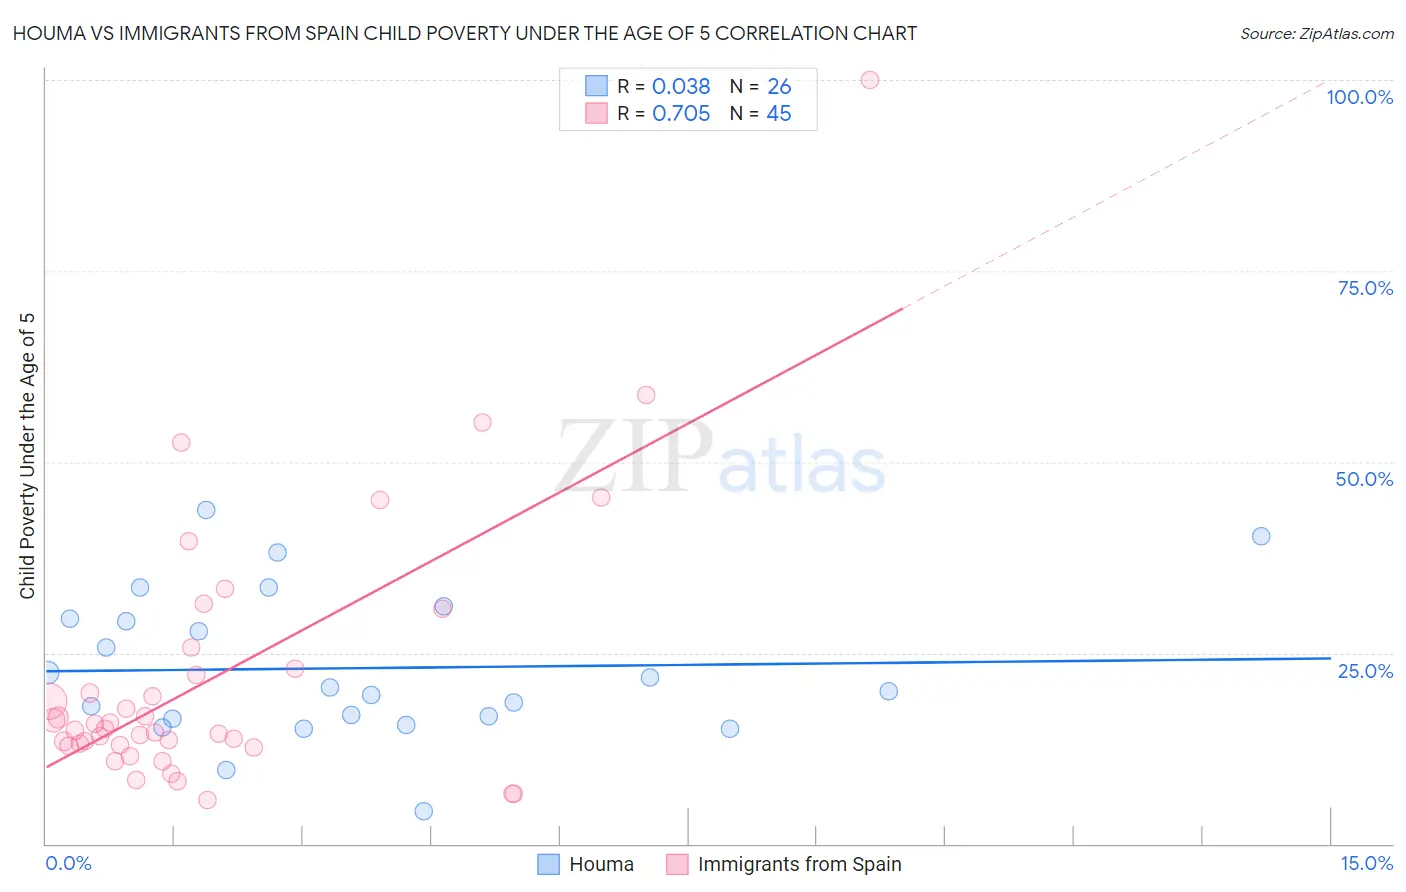 Houma vs Immigrants from Spain Child Poverty Under the Age of 5